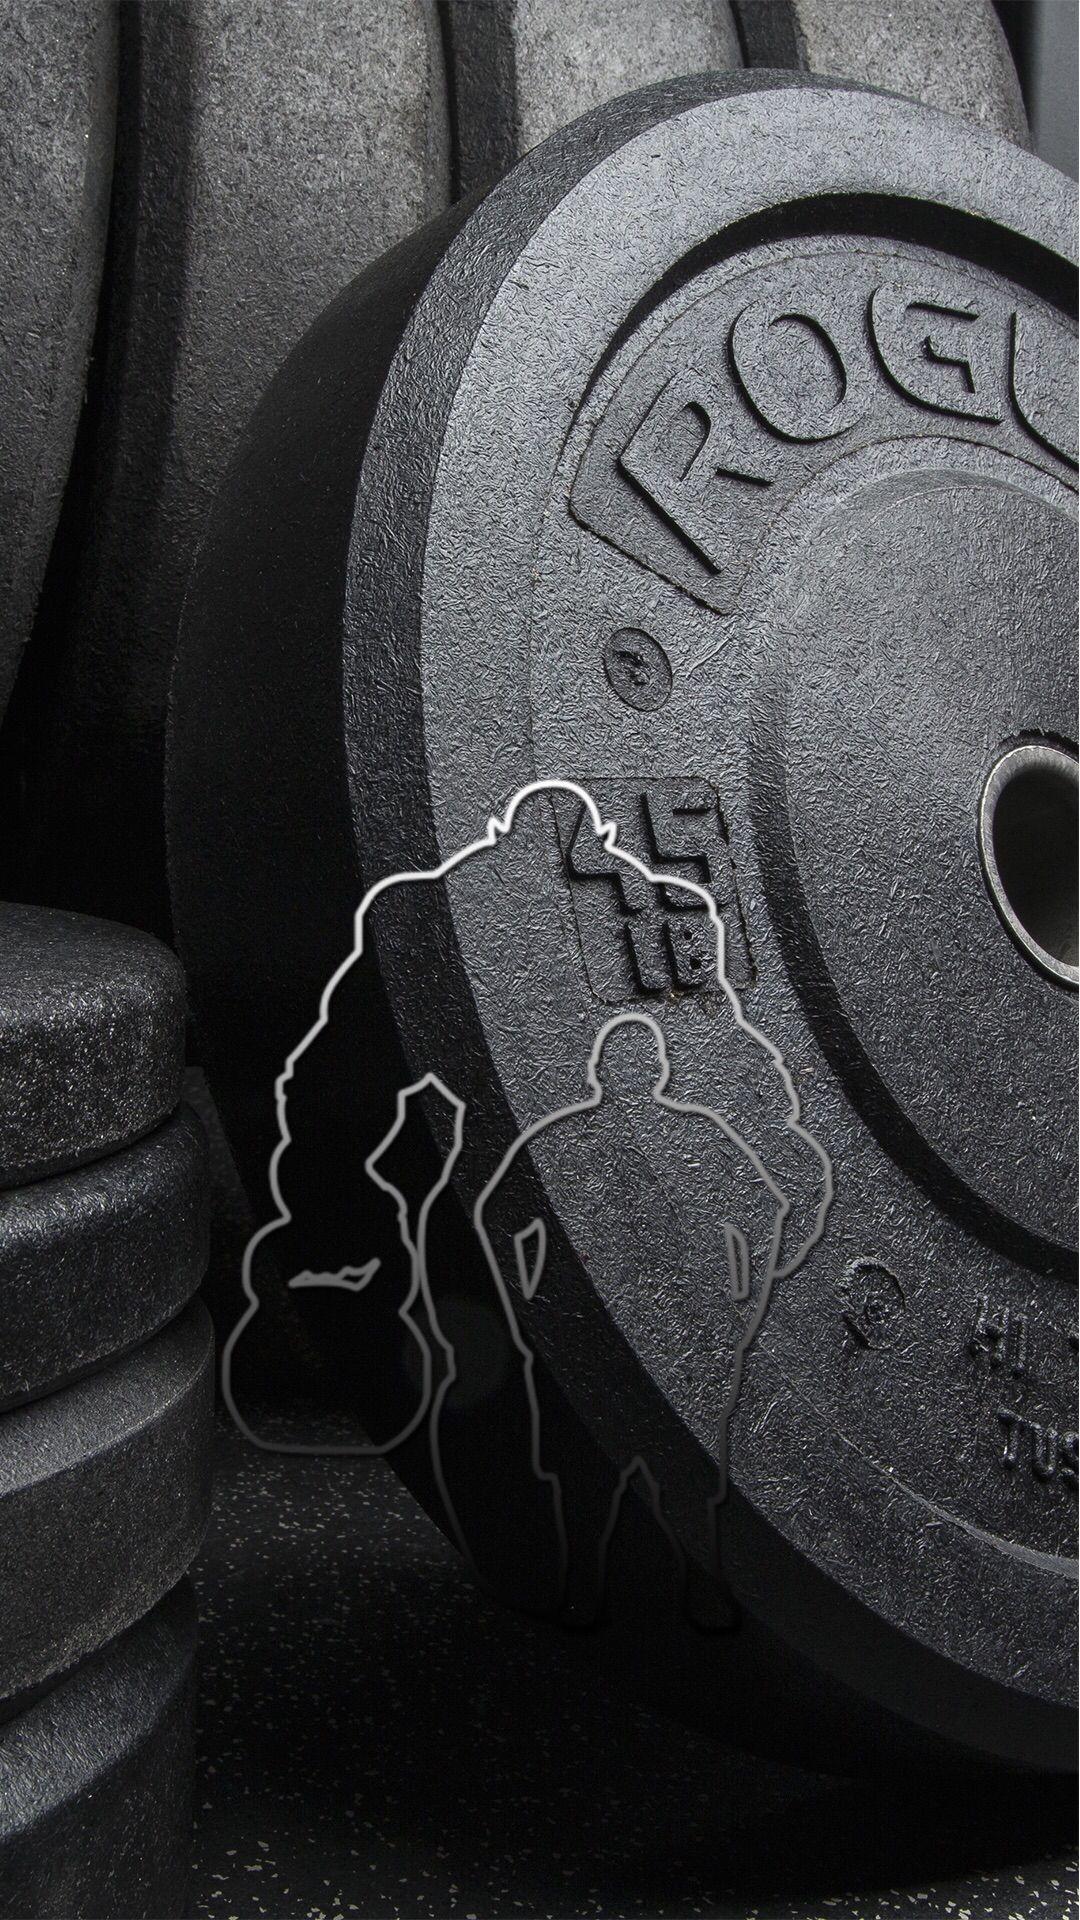 Gym iPhone Wallpapers - Top Free Gym iPhone Backgrounds ...